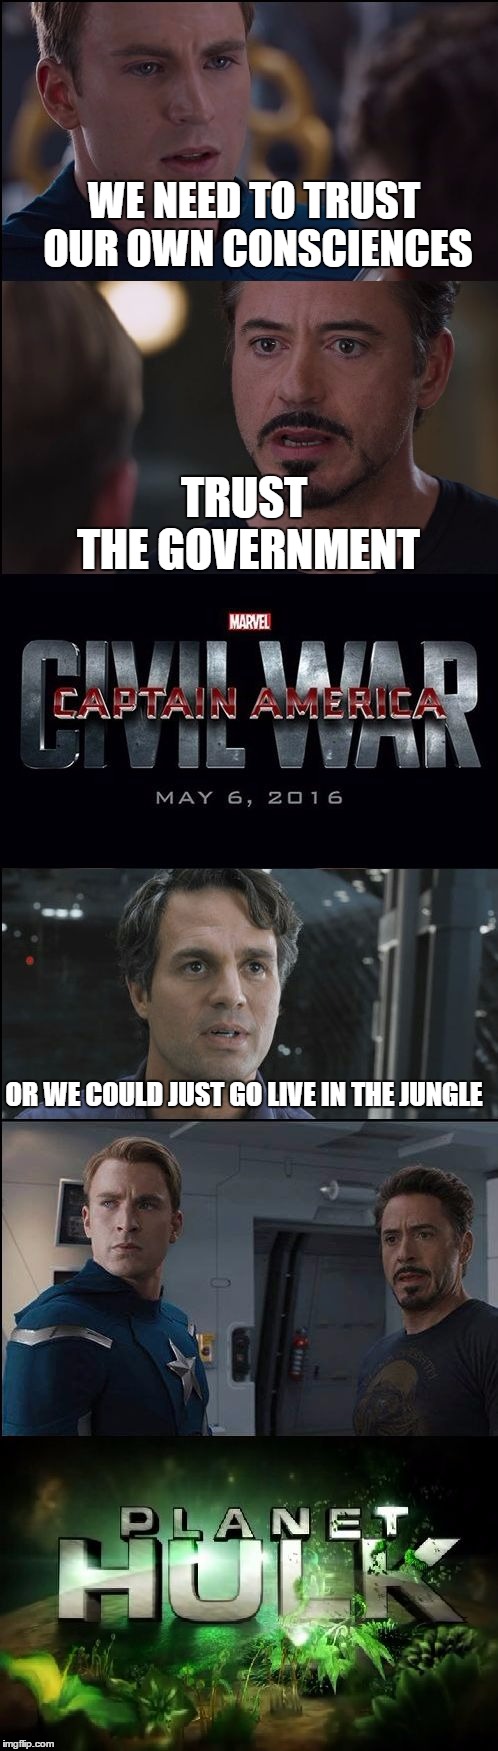 Civil War in a Nutshell | WE NEED TO TRUST OUR OWN CONSCIENCES; TRUST THE GOVERNMENT; OR WE COULD JUST GO LIVE IN THE JUNGLE | image tagged in civil war/planet hulk,marvel,marvel civil war 1,captain america,ironman,hulk | made w/ Imgflip meme maker